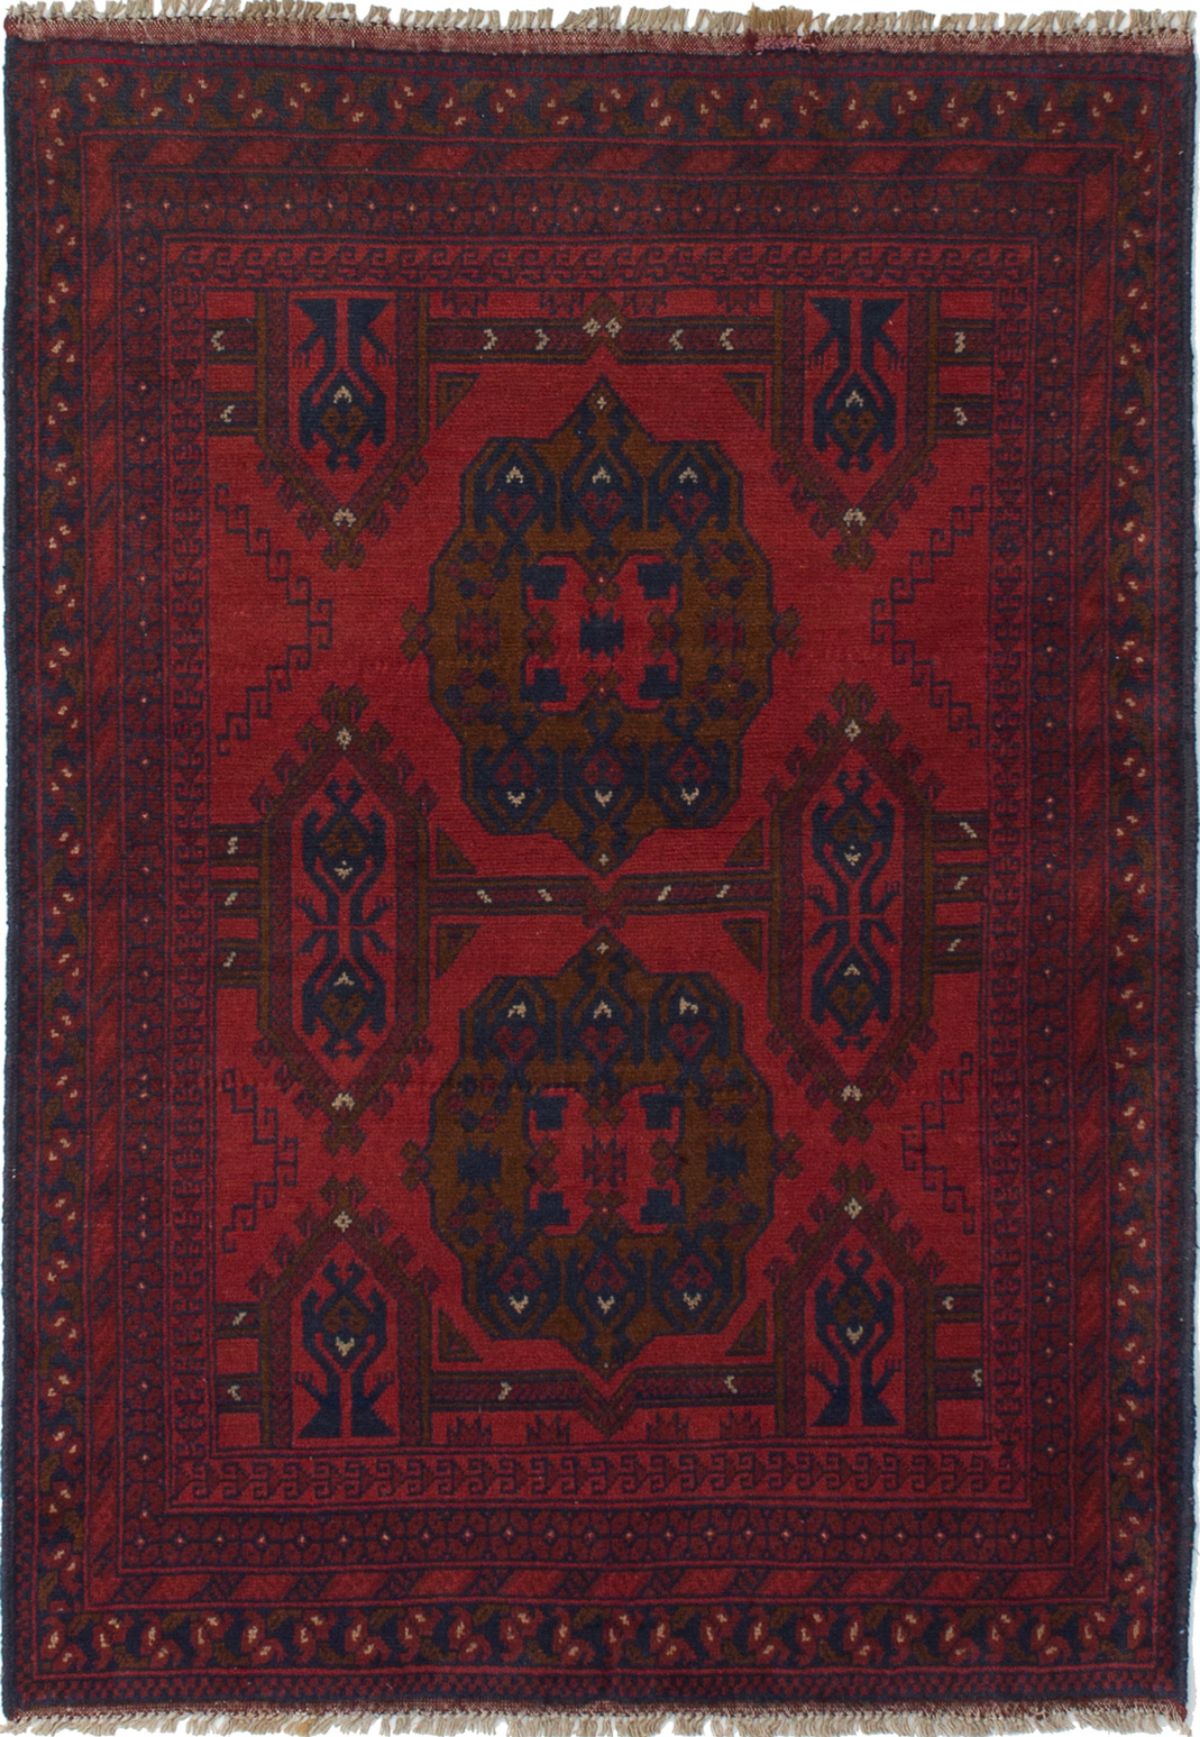 Hand-knotted Finest Khal Mohammadi Red Wool Rug 3'5" x 4'10" (26) Size: 3'5" x 4'10"  